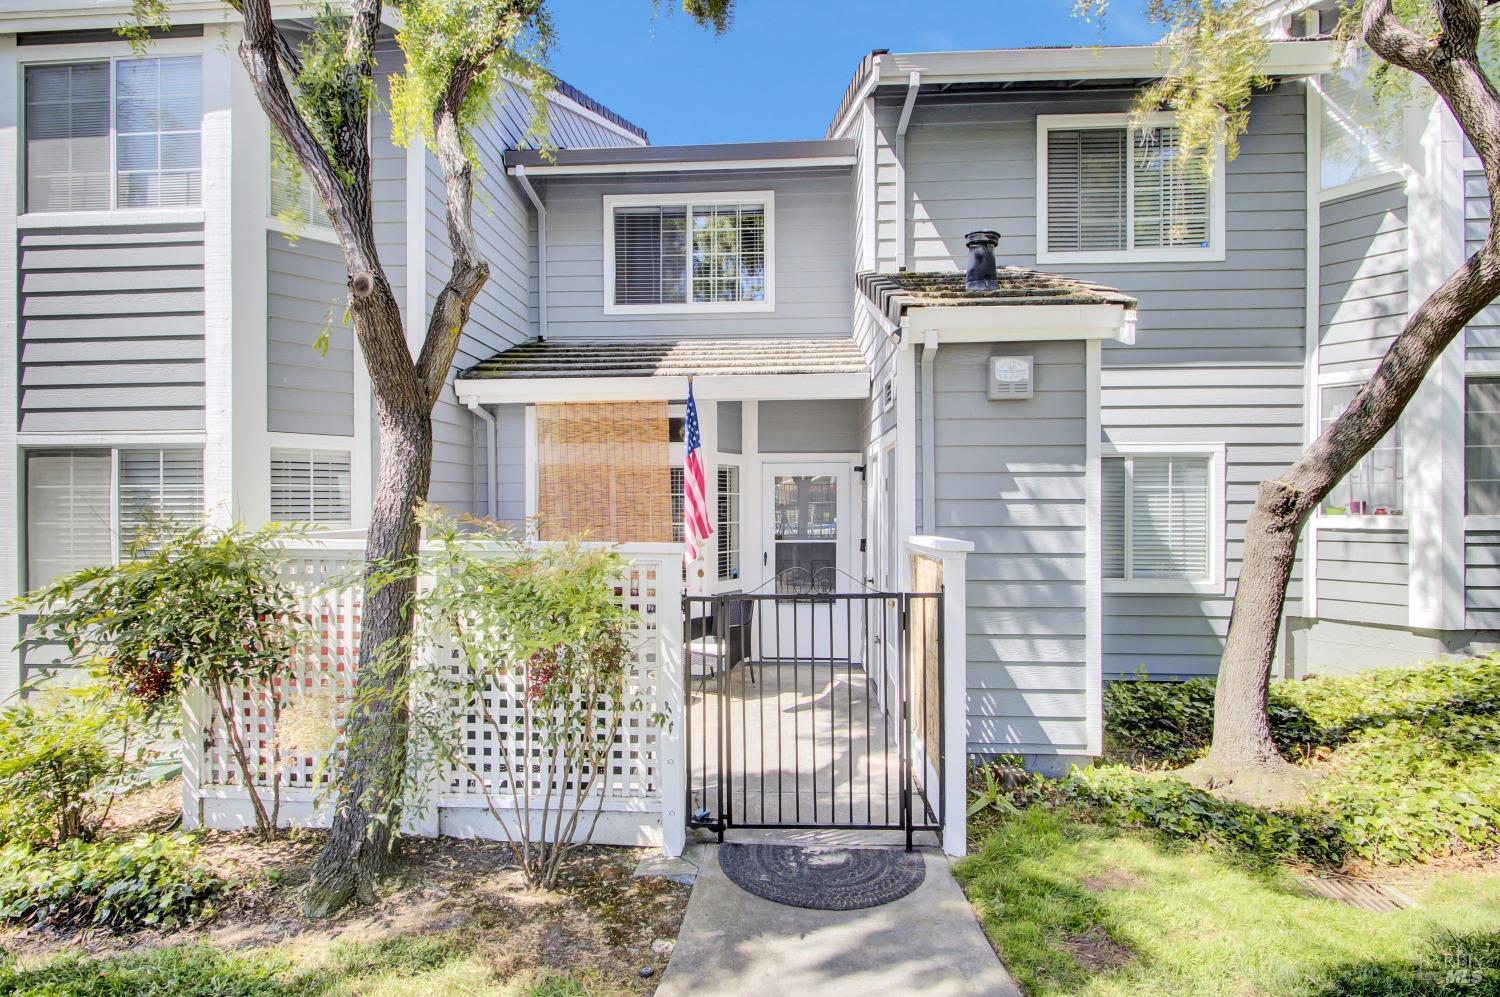 Photo of 703 Waterford Pl in Pinole, CA